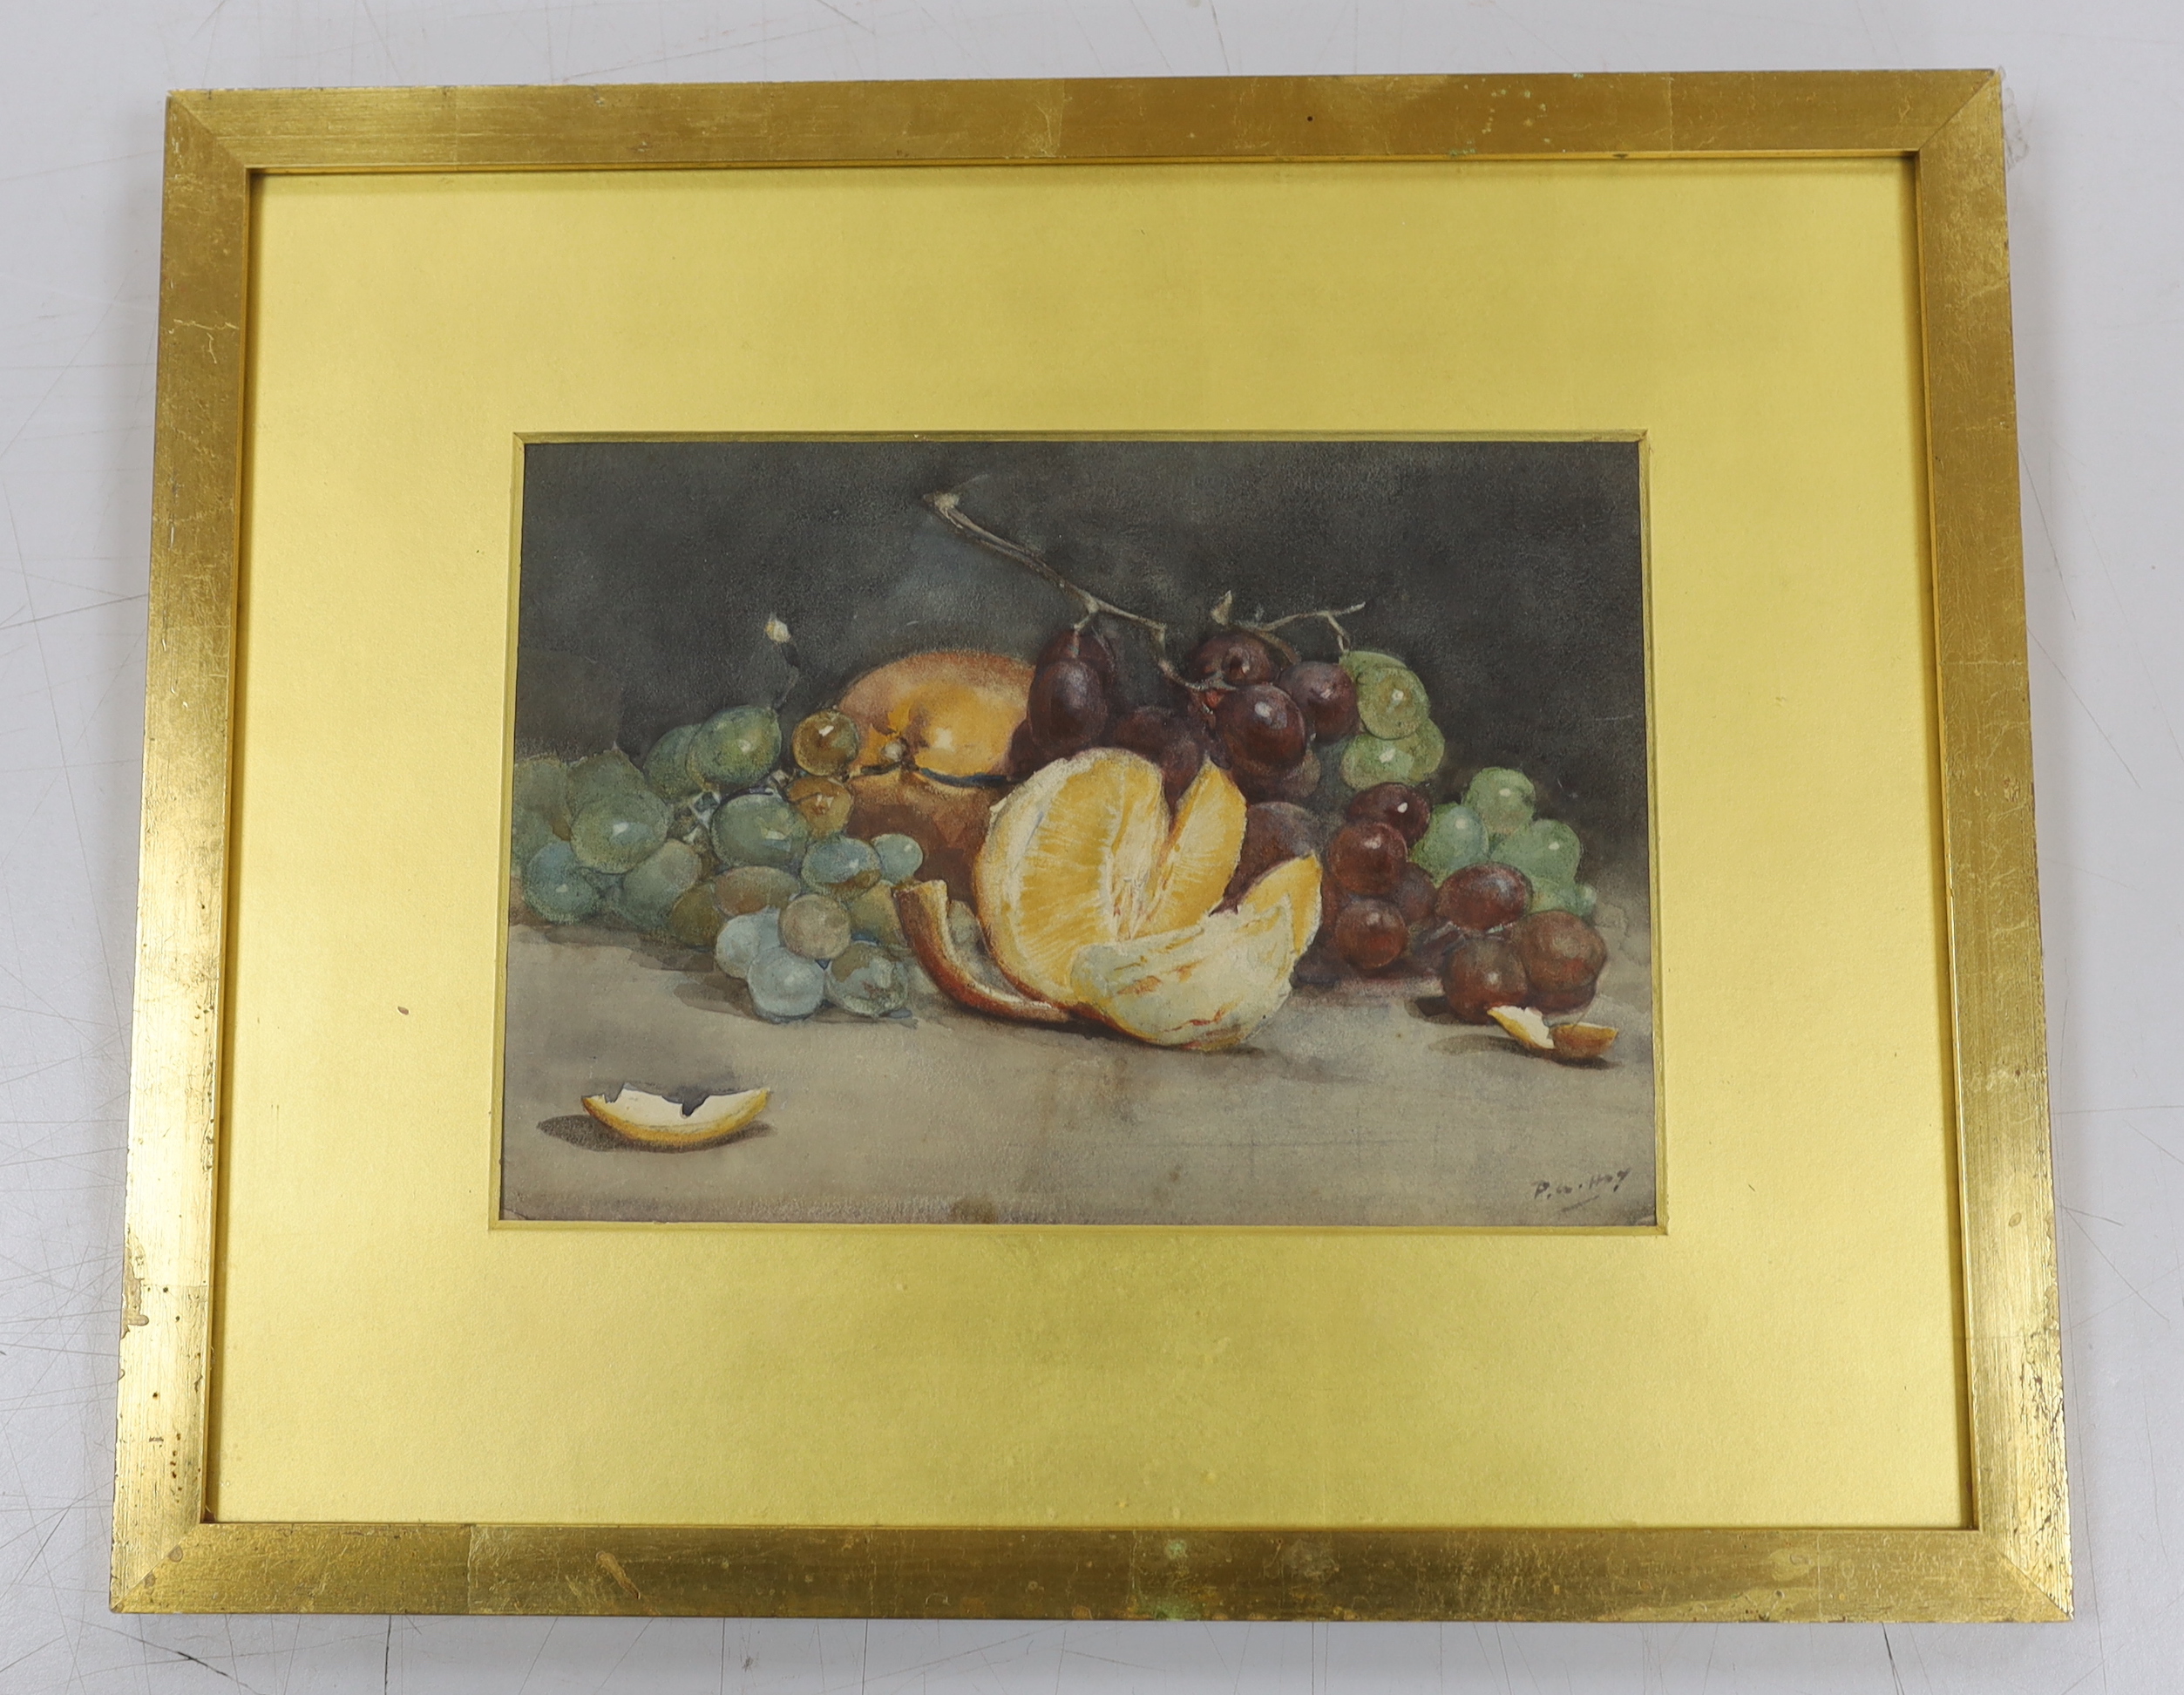 Peter Alexander Hay RA. (exh.1897), watercolour, Still life of fruit, signed, details verso, 18 x 24cm